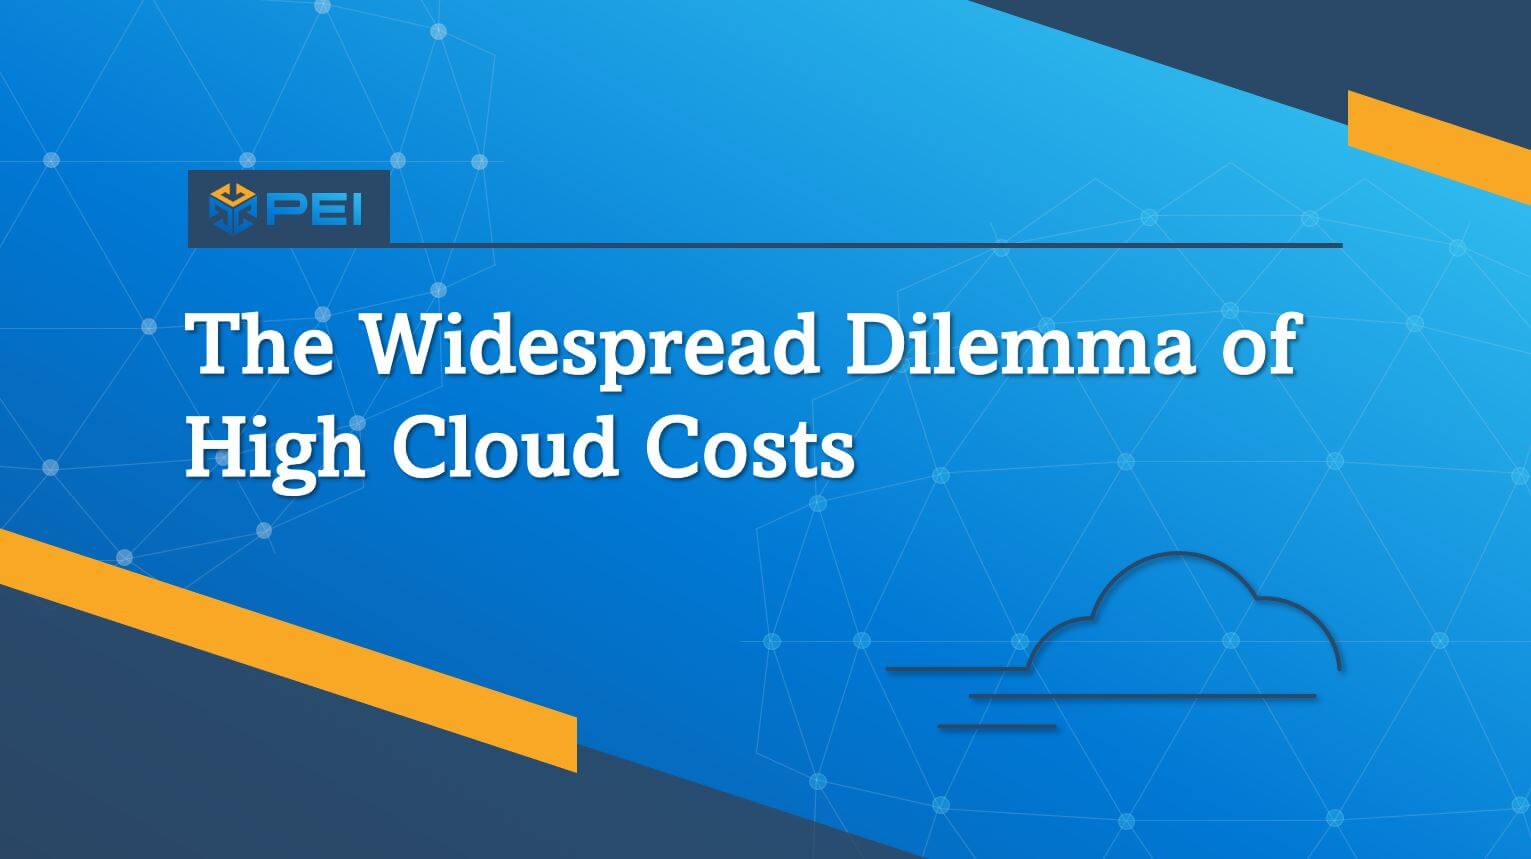 "The Widespread Dilemma of High Cloud Costs" blue background